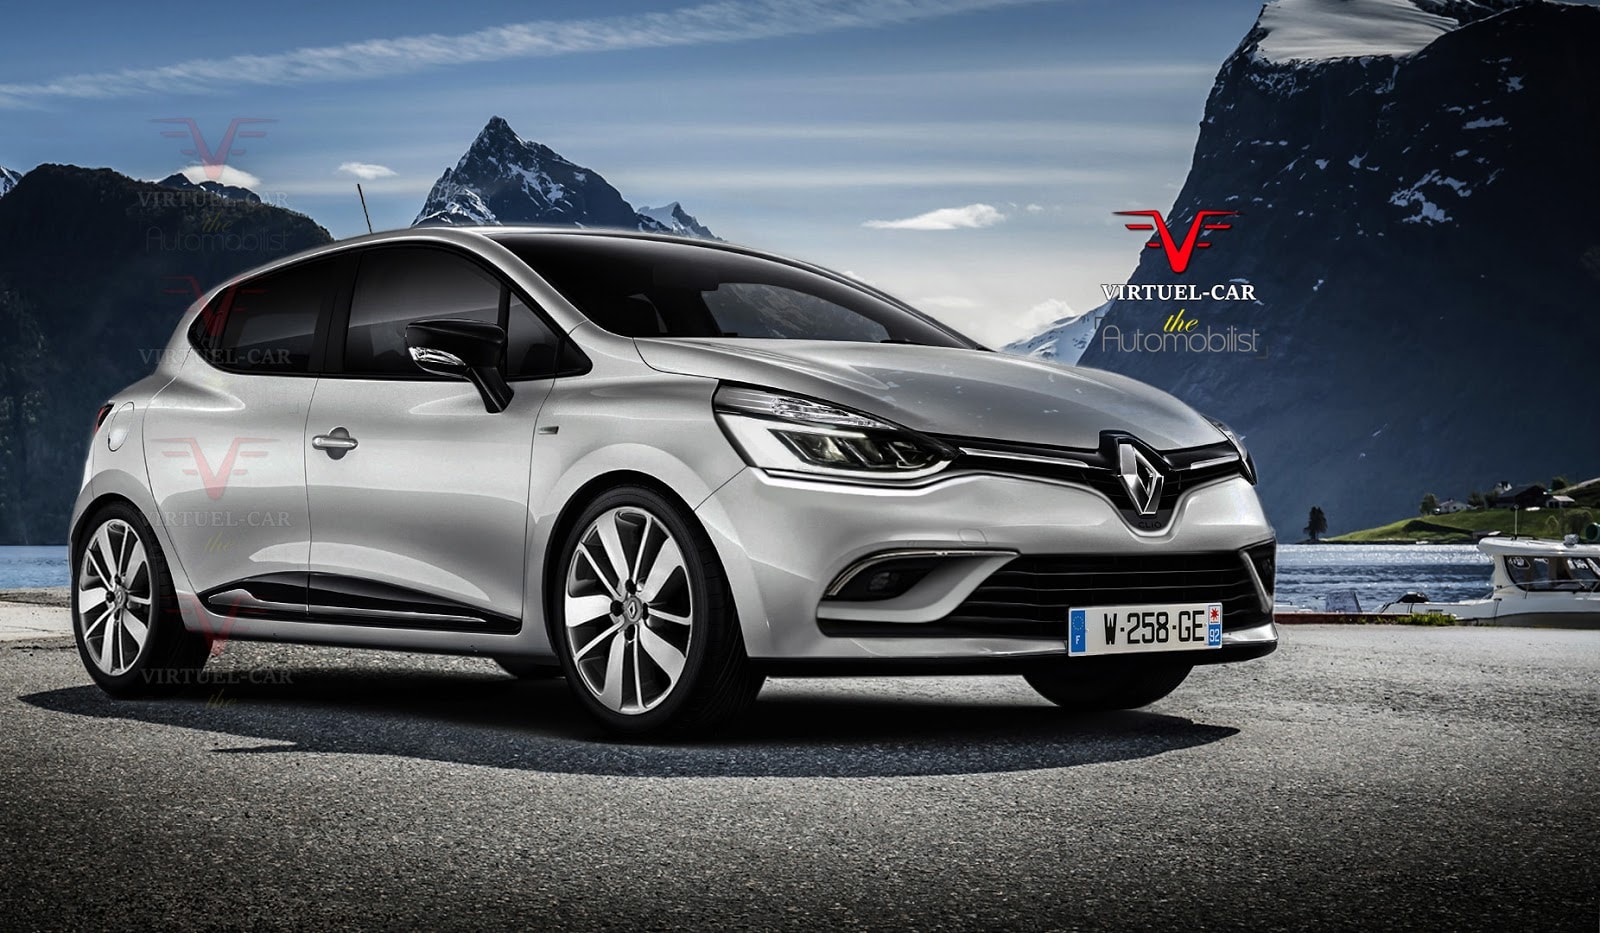 2017 Renault Clio IV Facelift Rendered Based on Recent